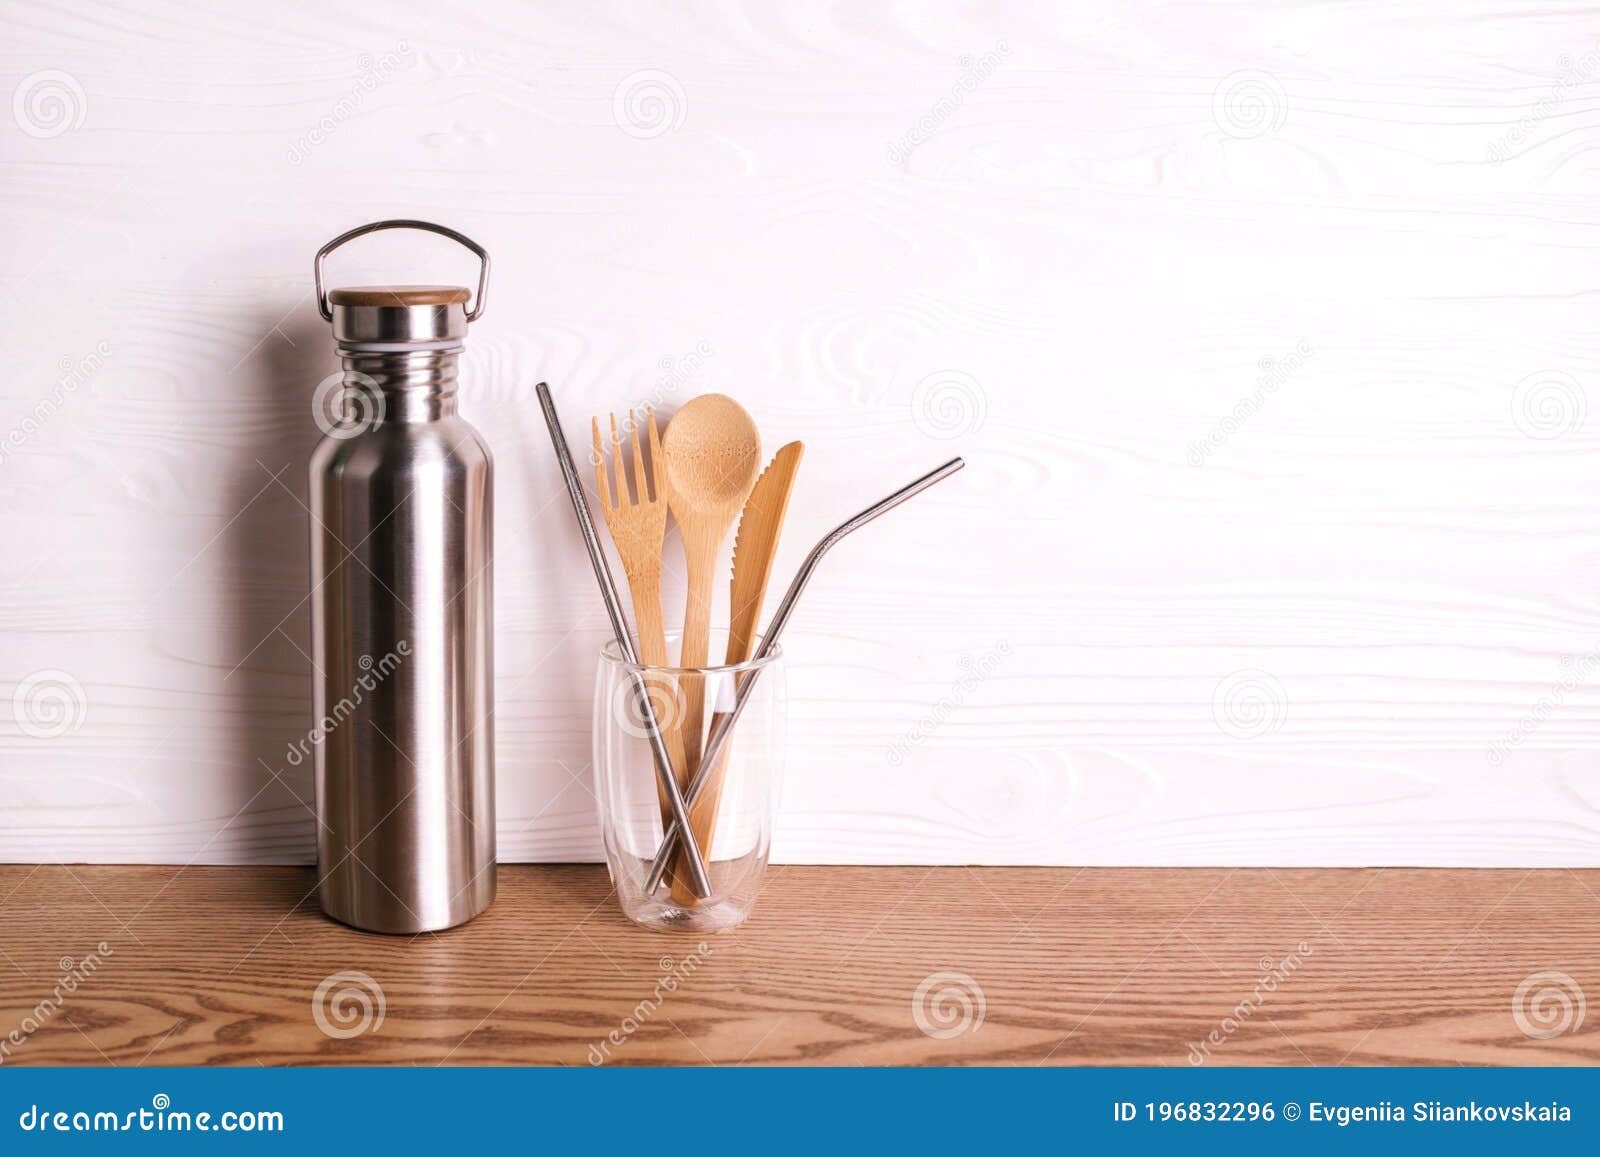 eco set with bamboo cutlery, reusable water bottle on wooden background.